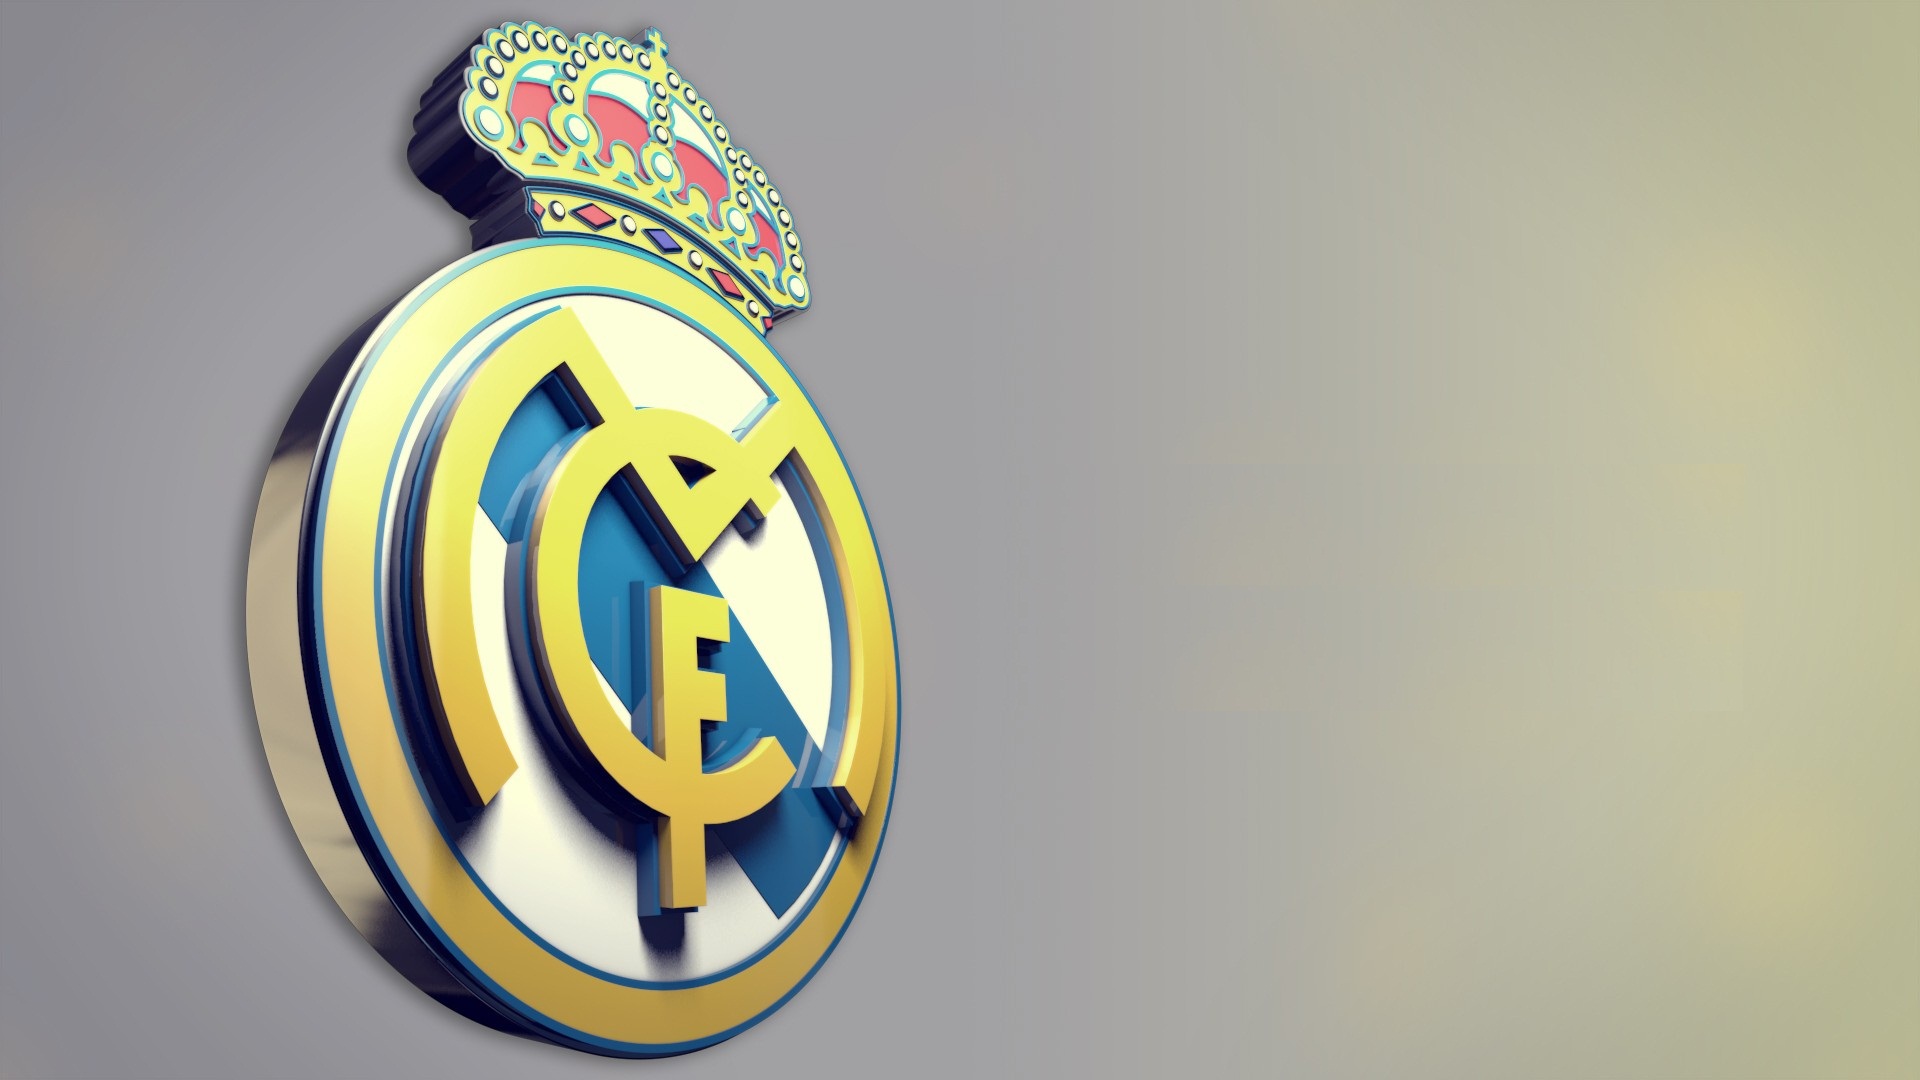 Wallpaper Desktop Real Madrid HD With Resolution 1920X1080 pixel. You can make this wallpaper for your Mac or Windows Desktop Background, iPhone, Android or Tablet and another Smartphone device for free